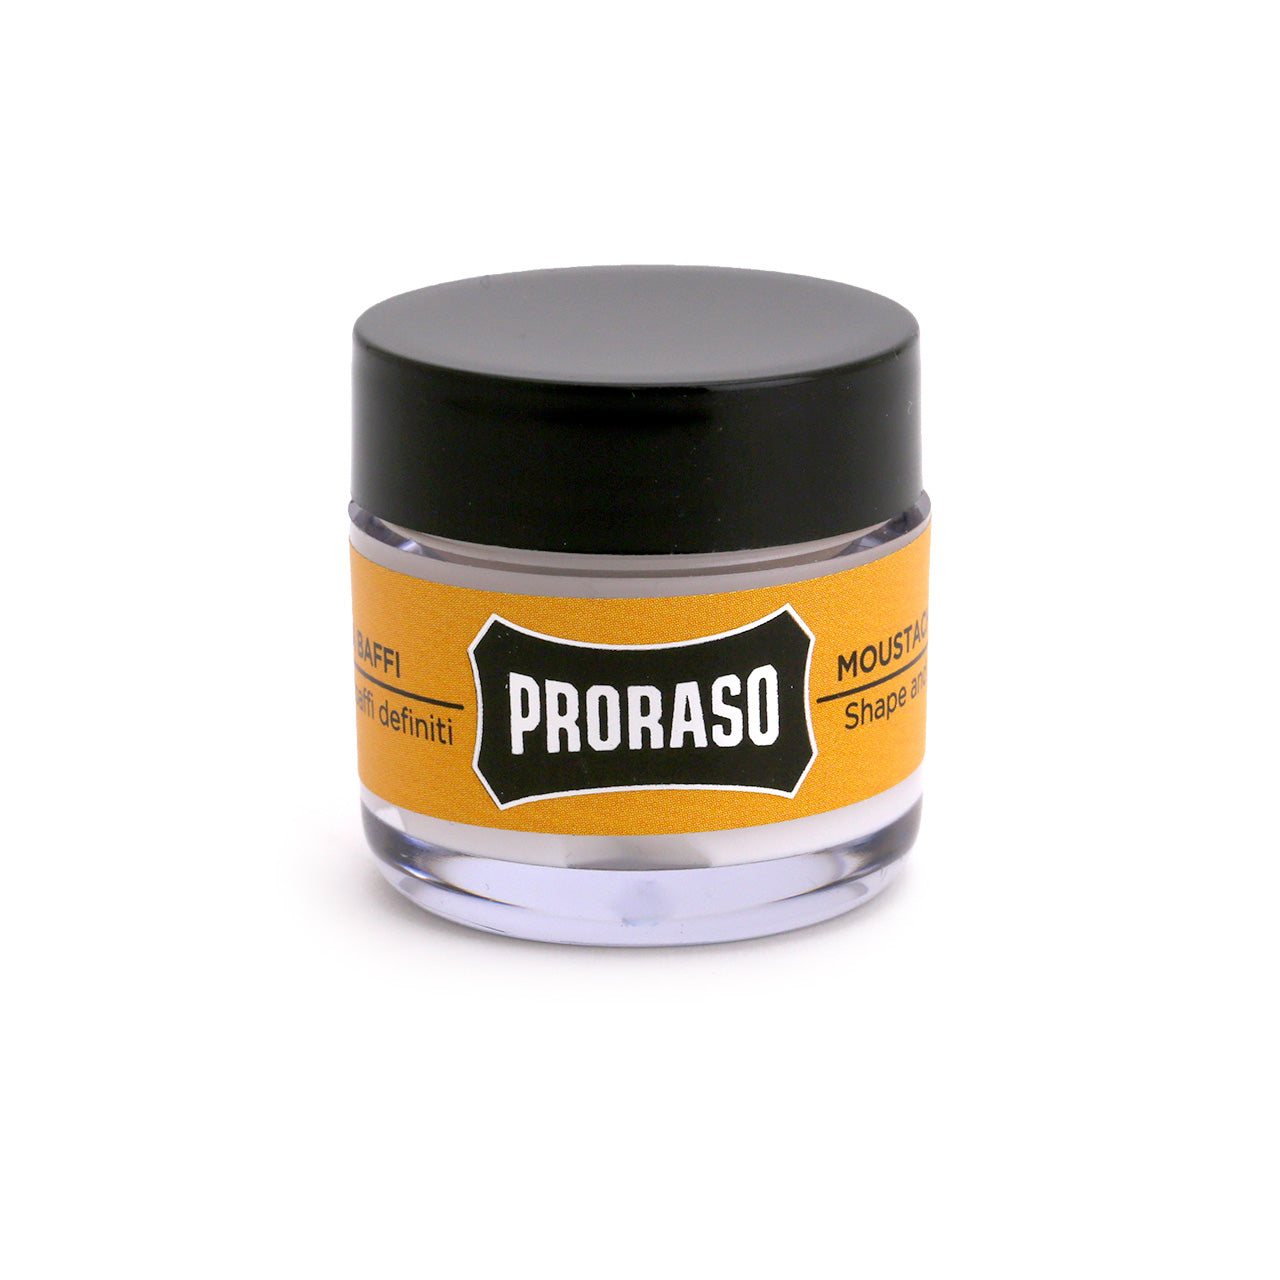 Proraso moustache Wax - Wood and Spice in a small glass jar with black lid with Box